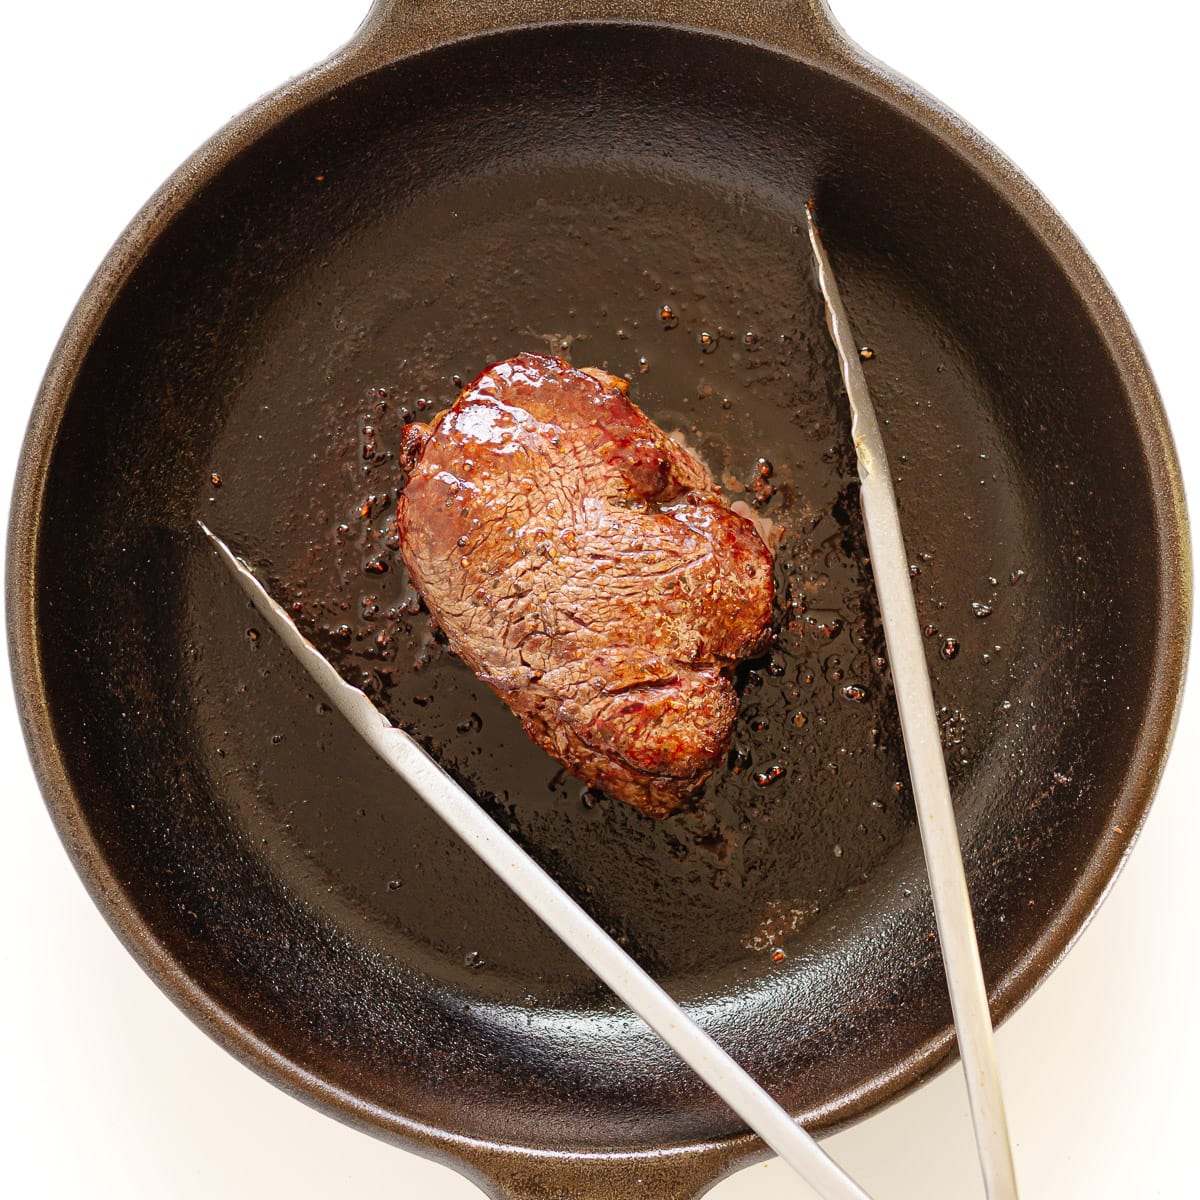 Filet mignon searing in a cast iron skillet.